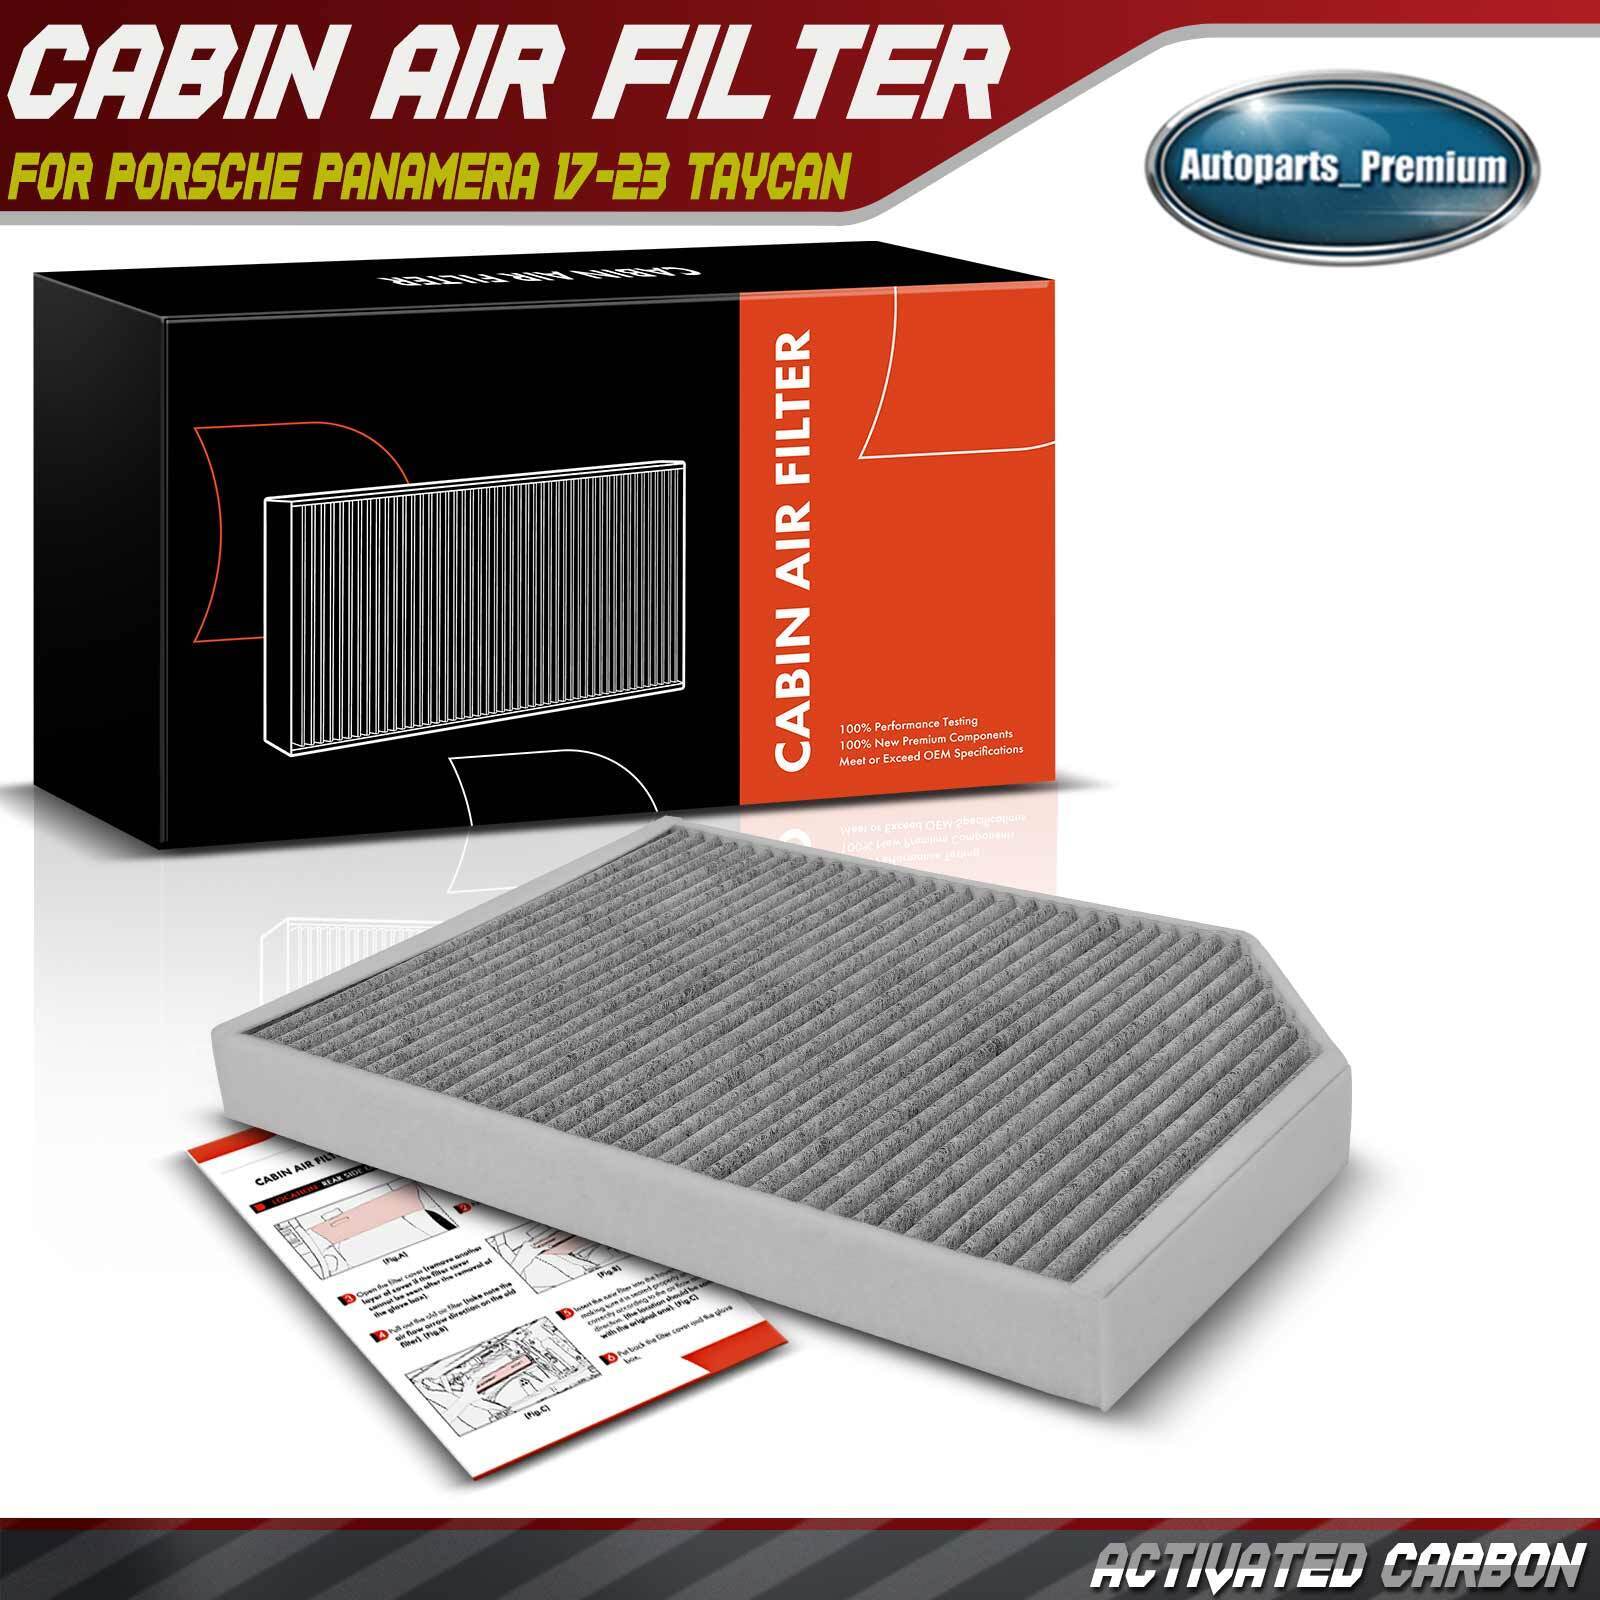 New Front Activated Carbon Cabin Air Filter for Porsche Panamera 17-23 Taycan